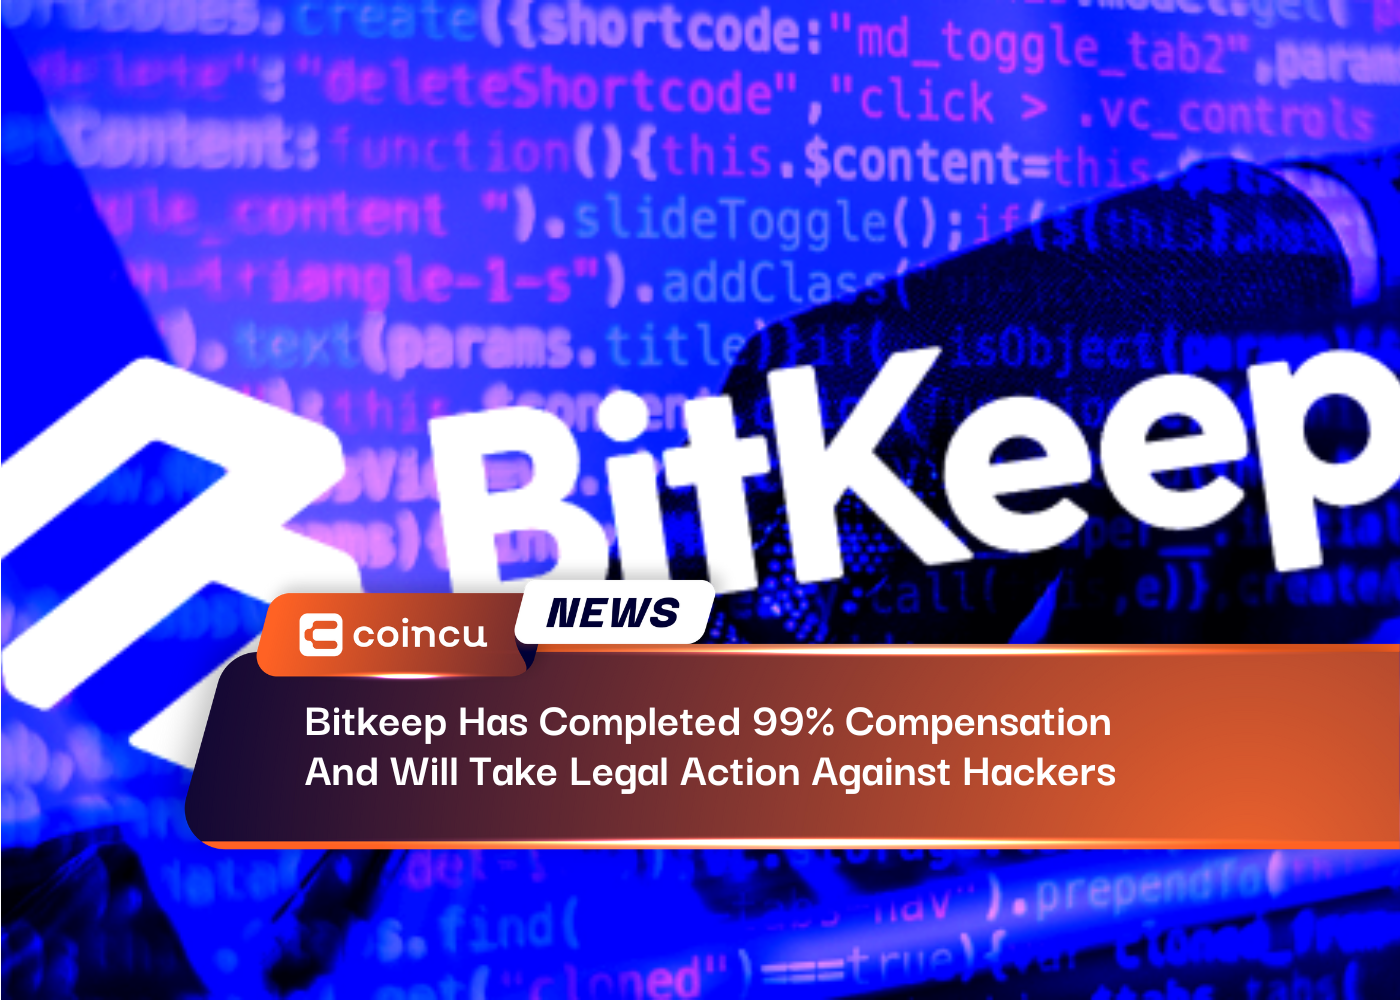 Bitkeep Has Completed 99% Compensation And Will Take Legal Action Against Hackers